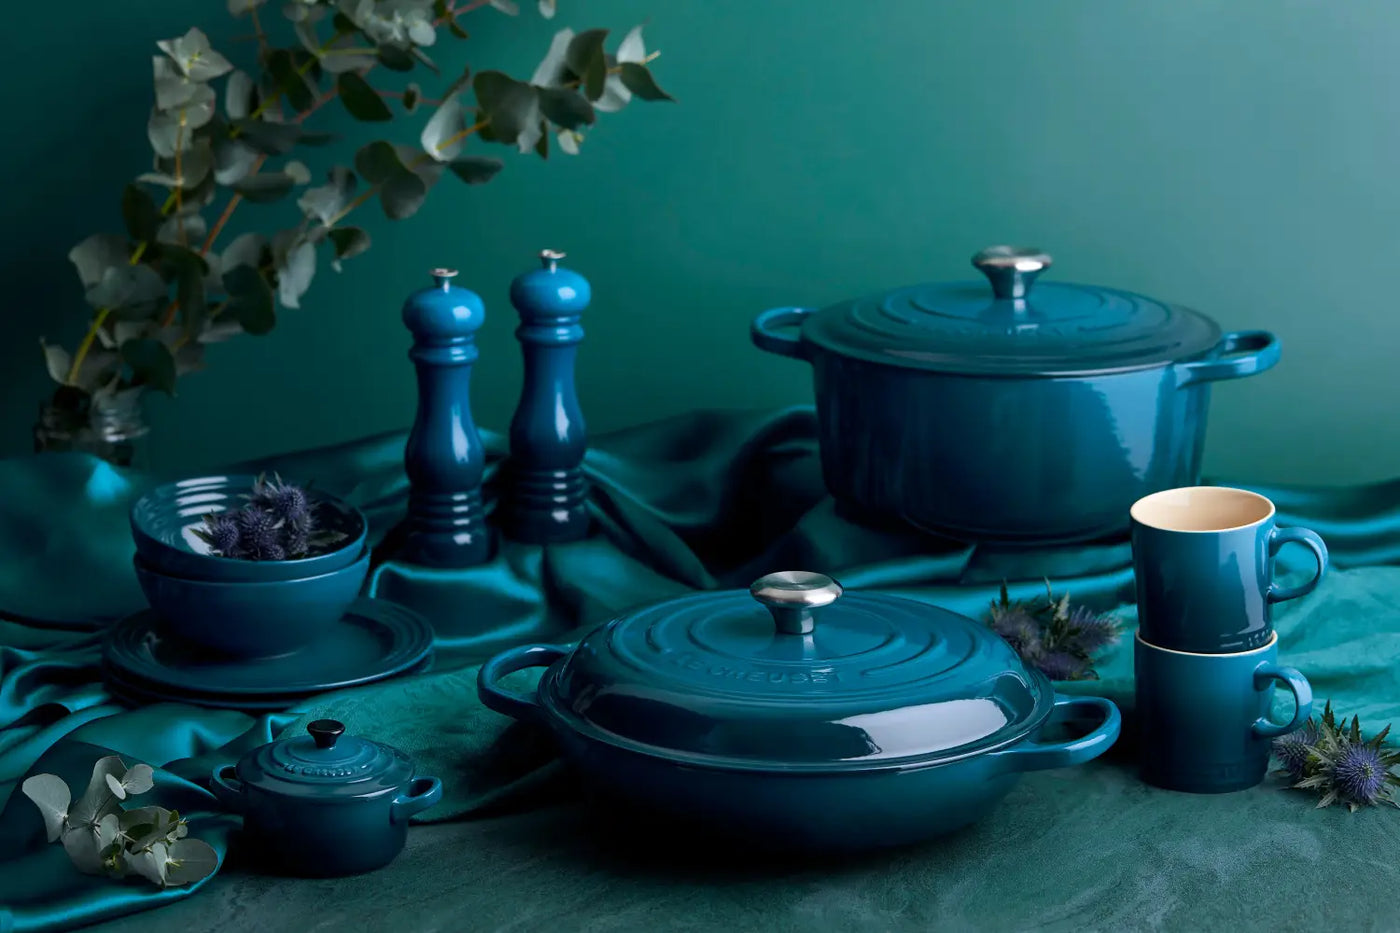 Le Creuset Deep Teal Casseroles, Mills, Mugs and other cookware